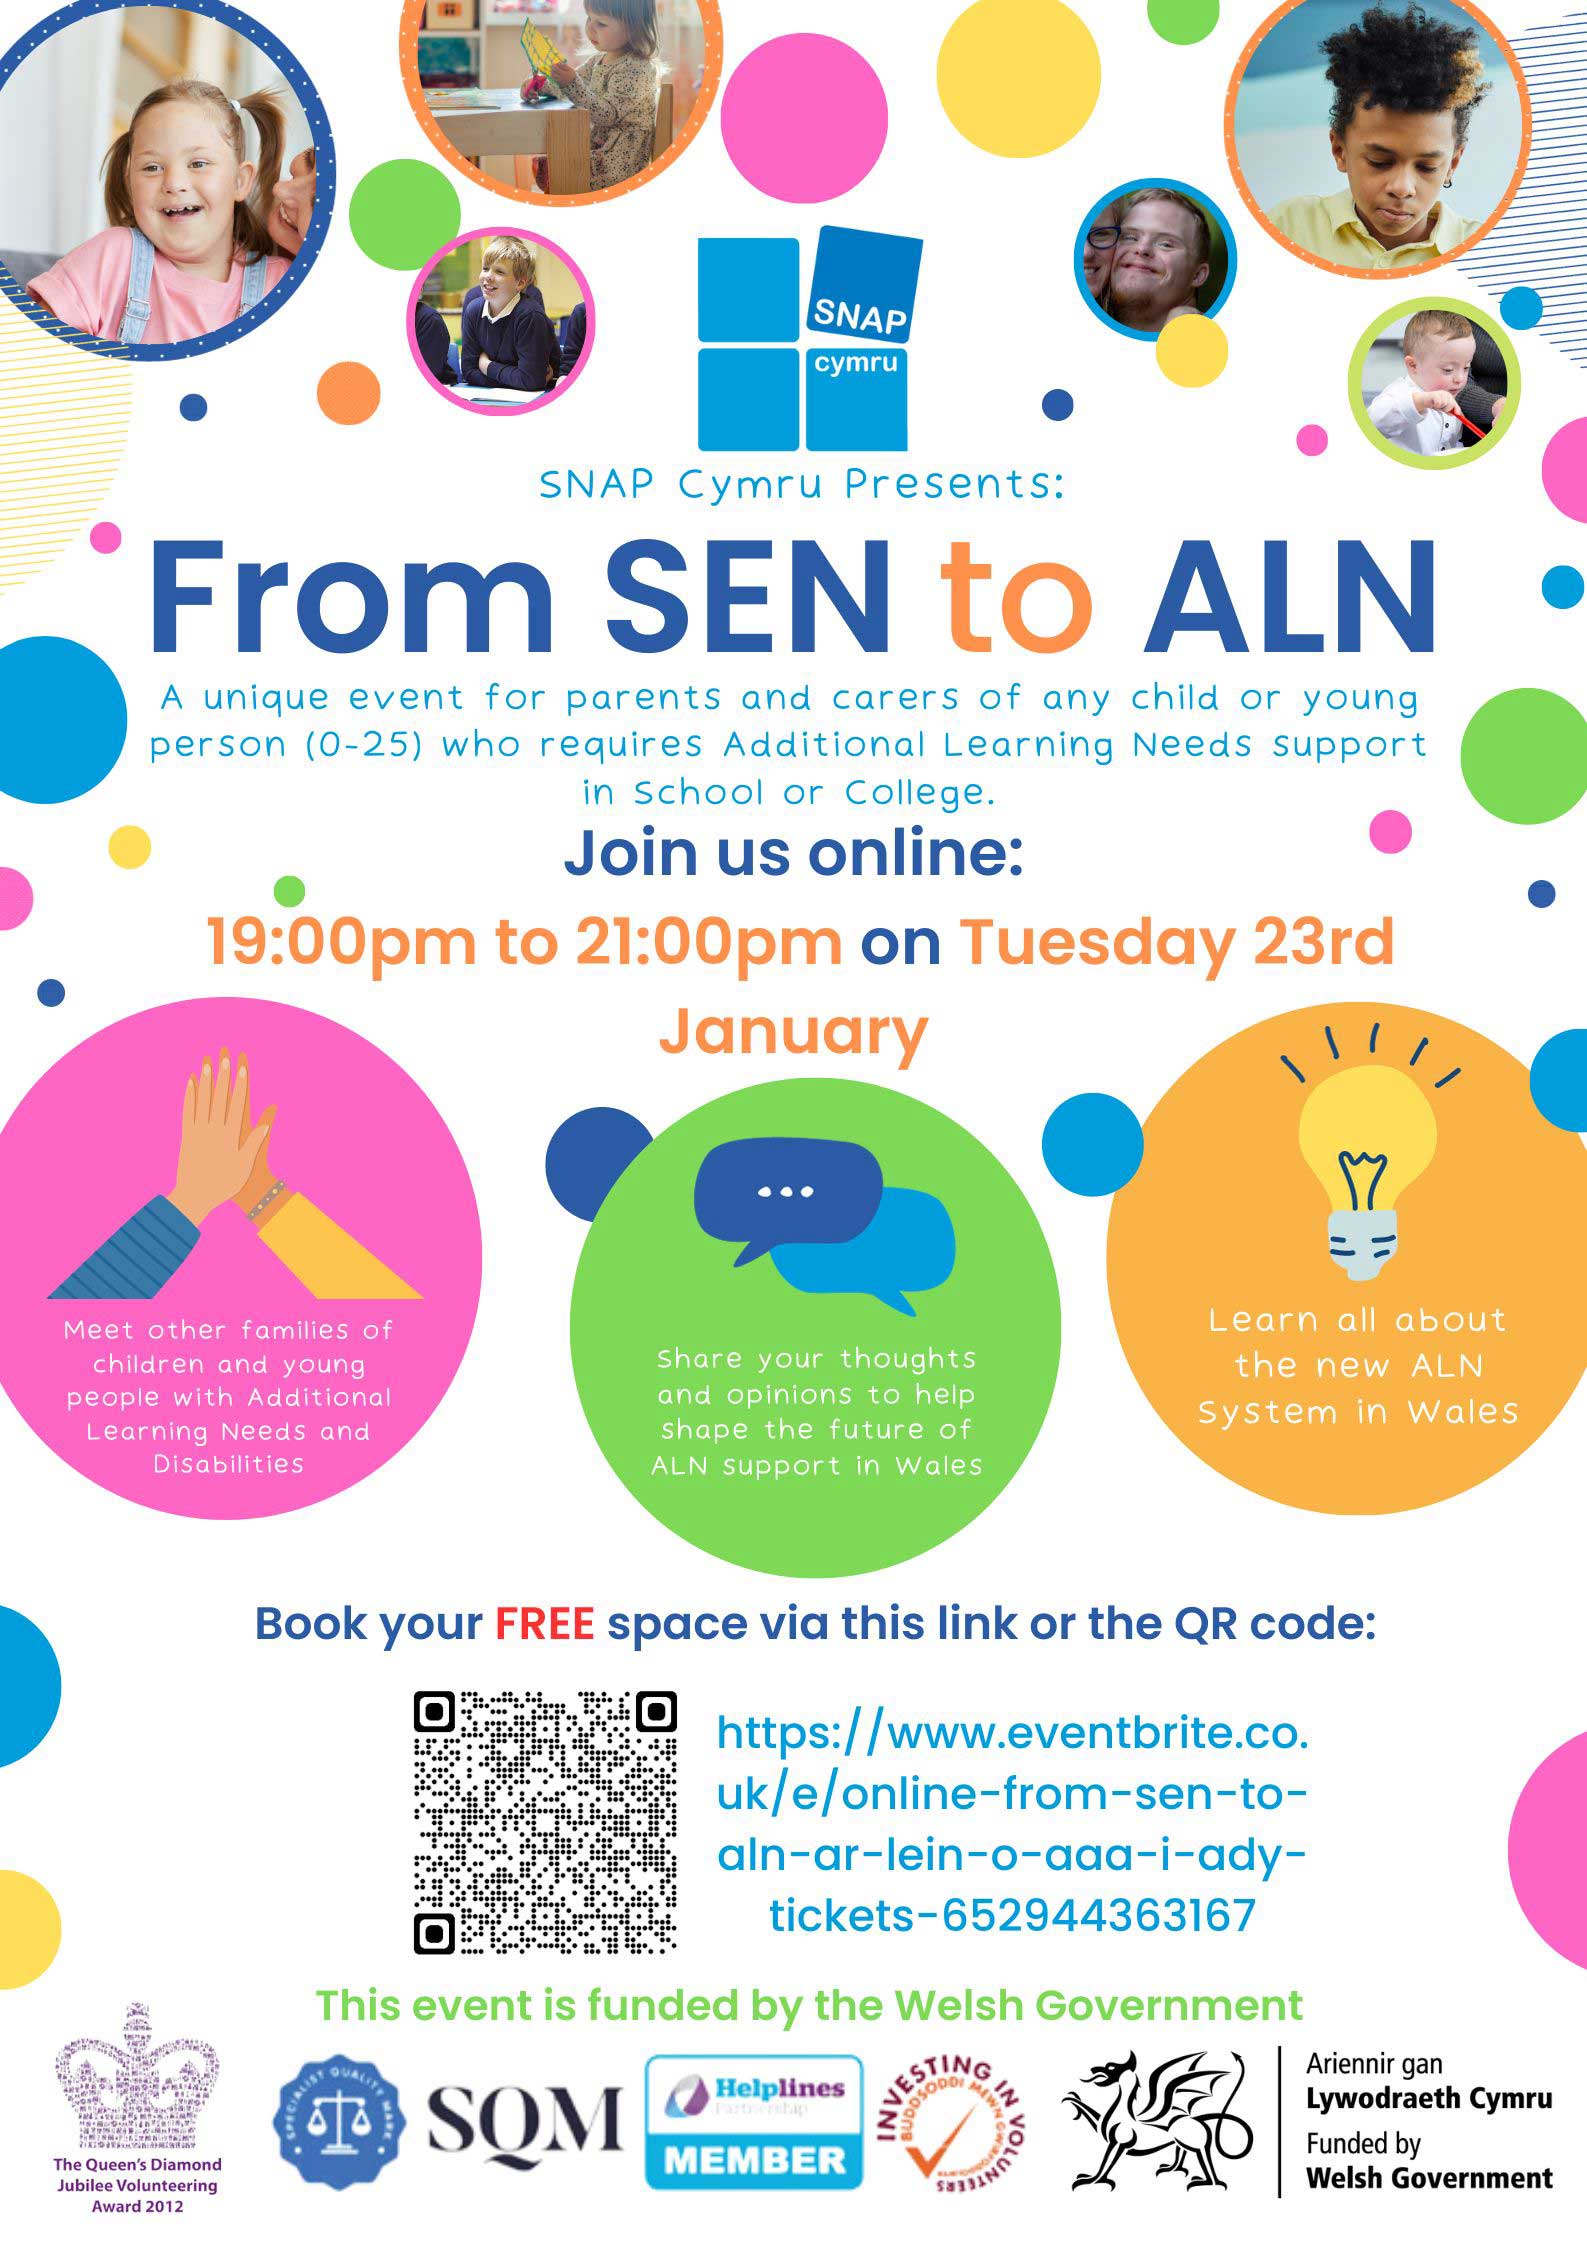 From SEN to ALN - A unique event for parents and carers